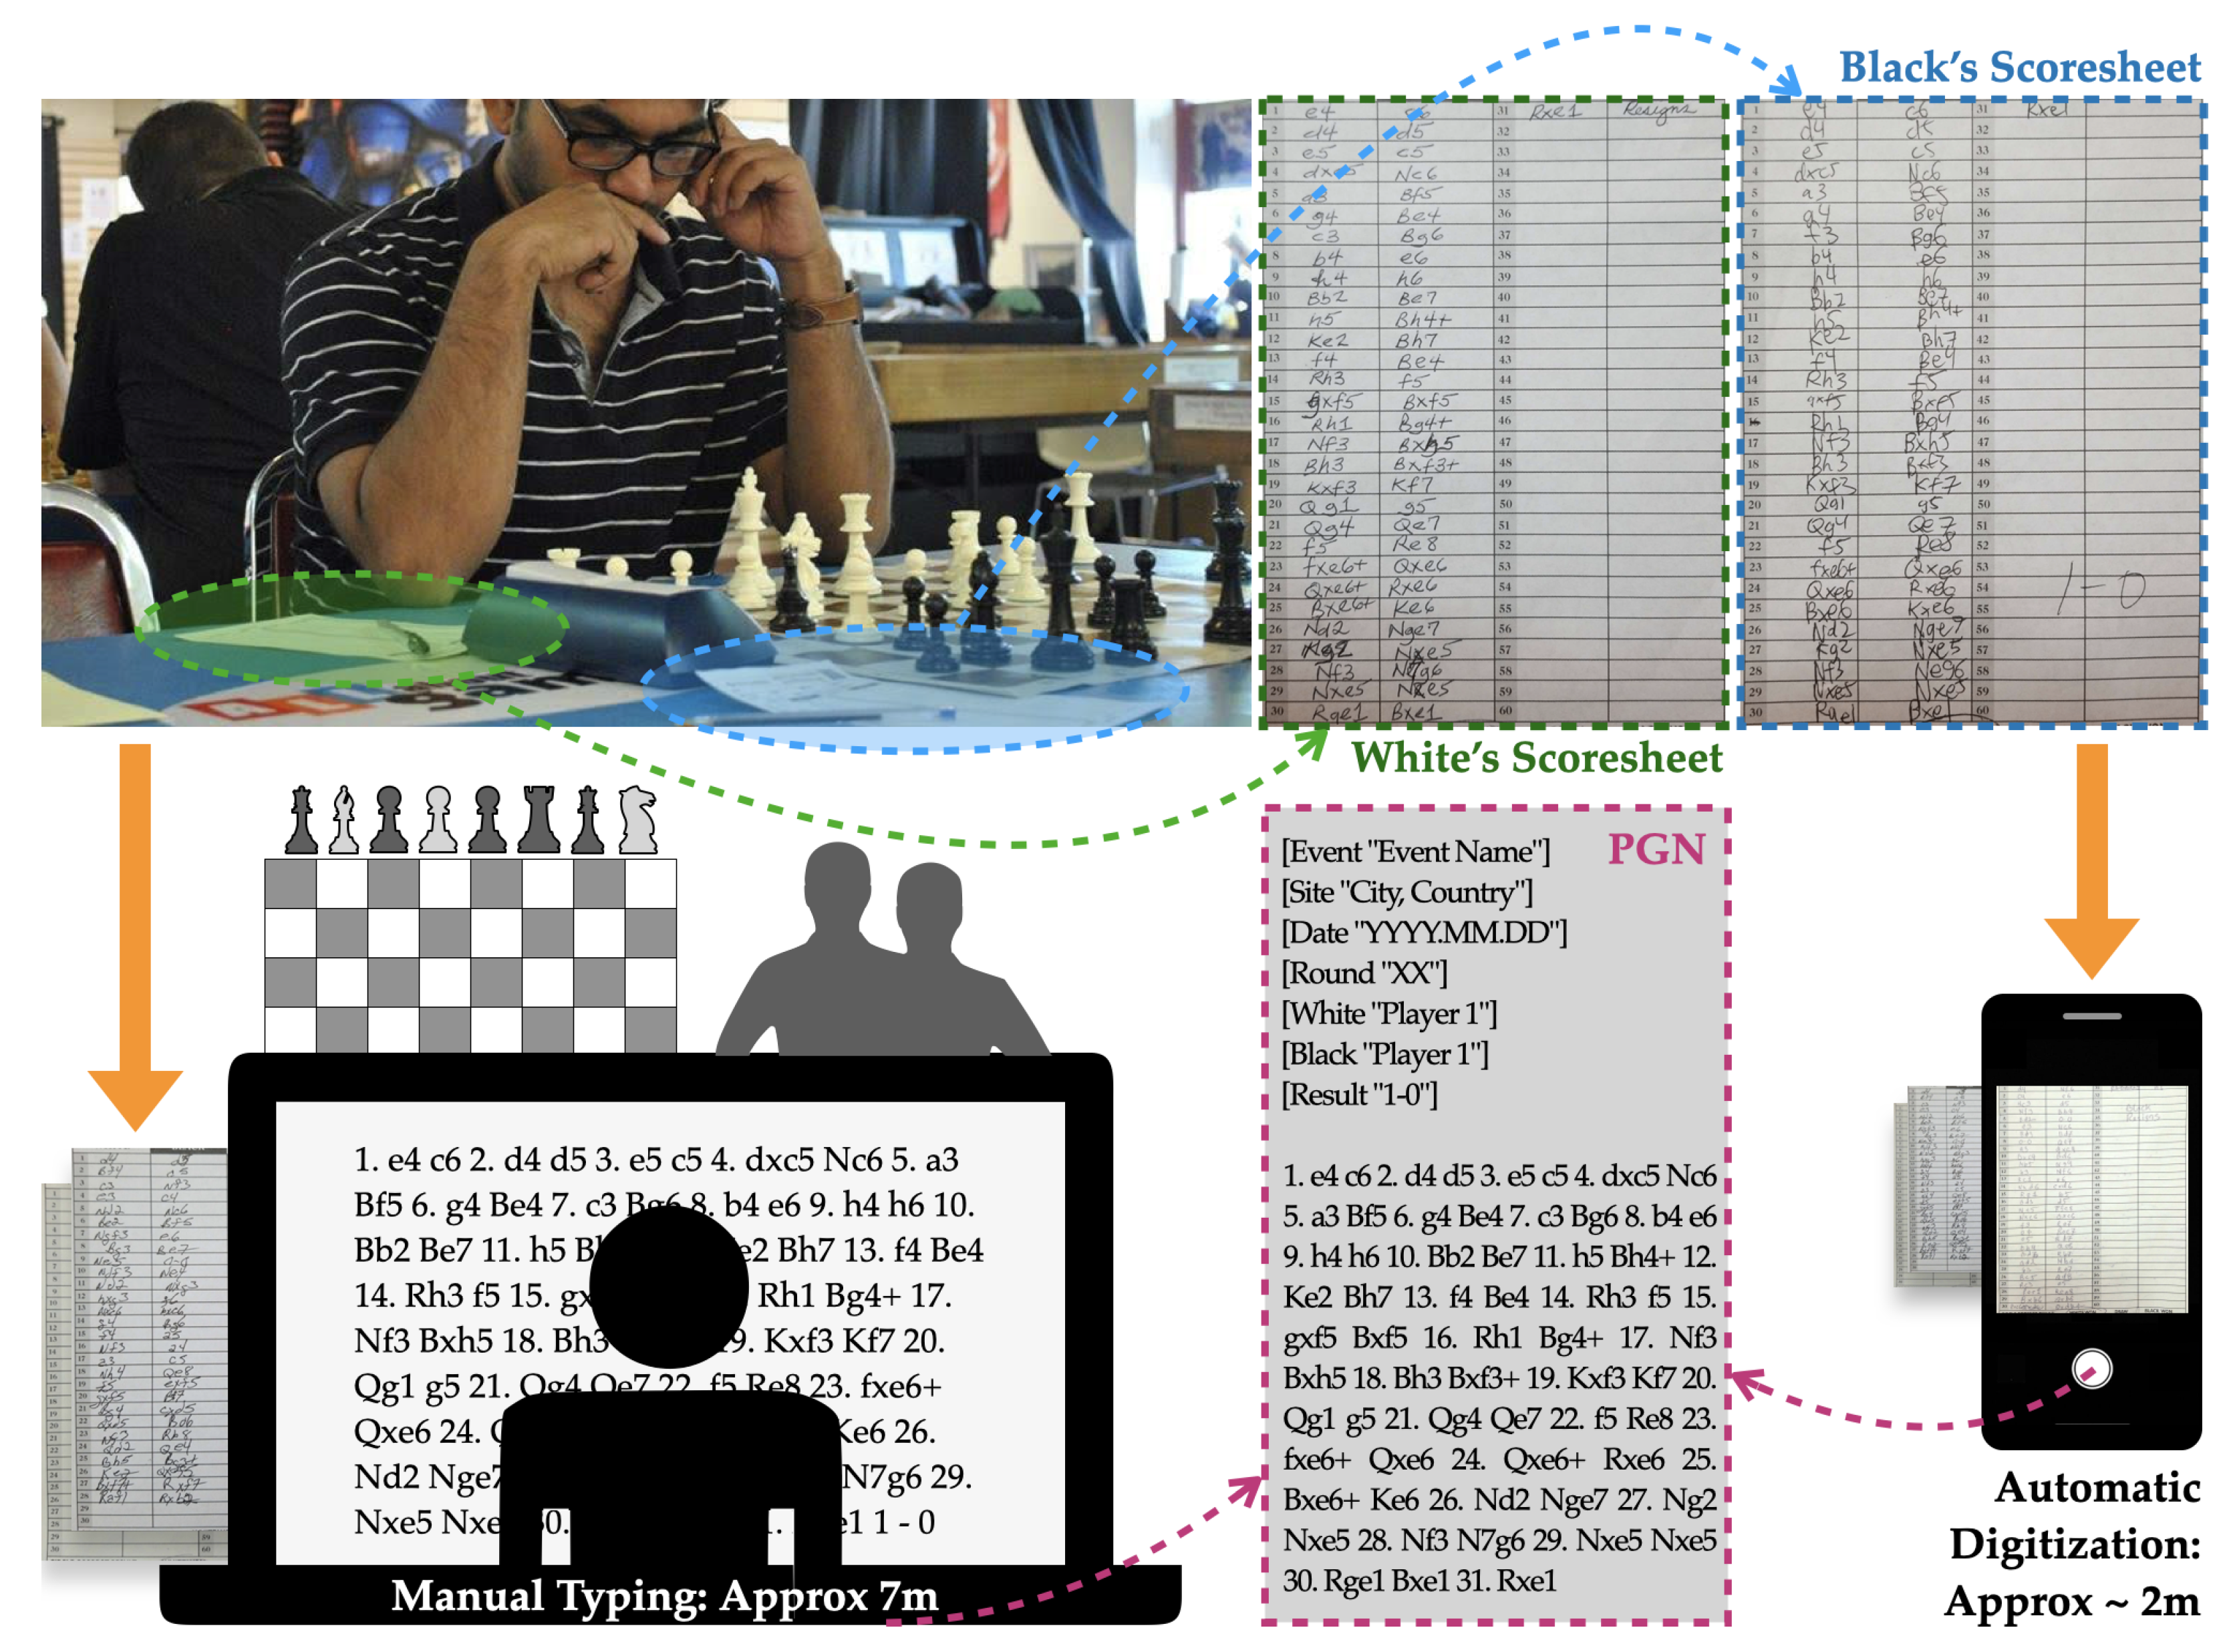 How to Calculate in Chess: Complete Guide - TheChessWorld